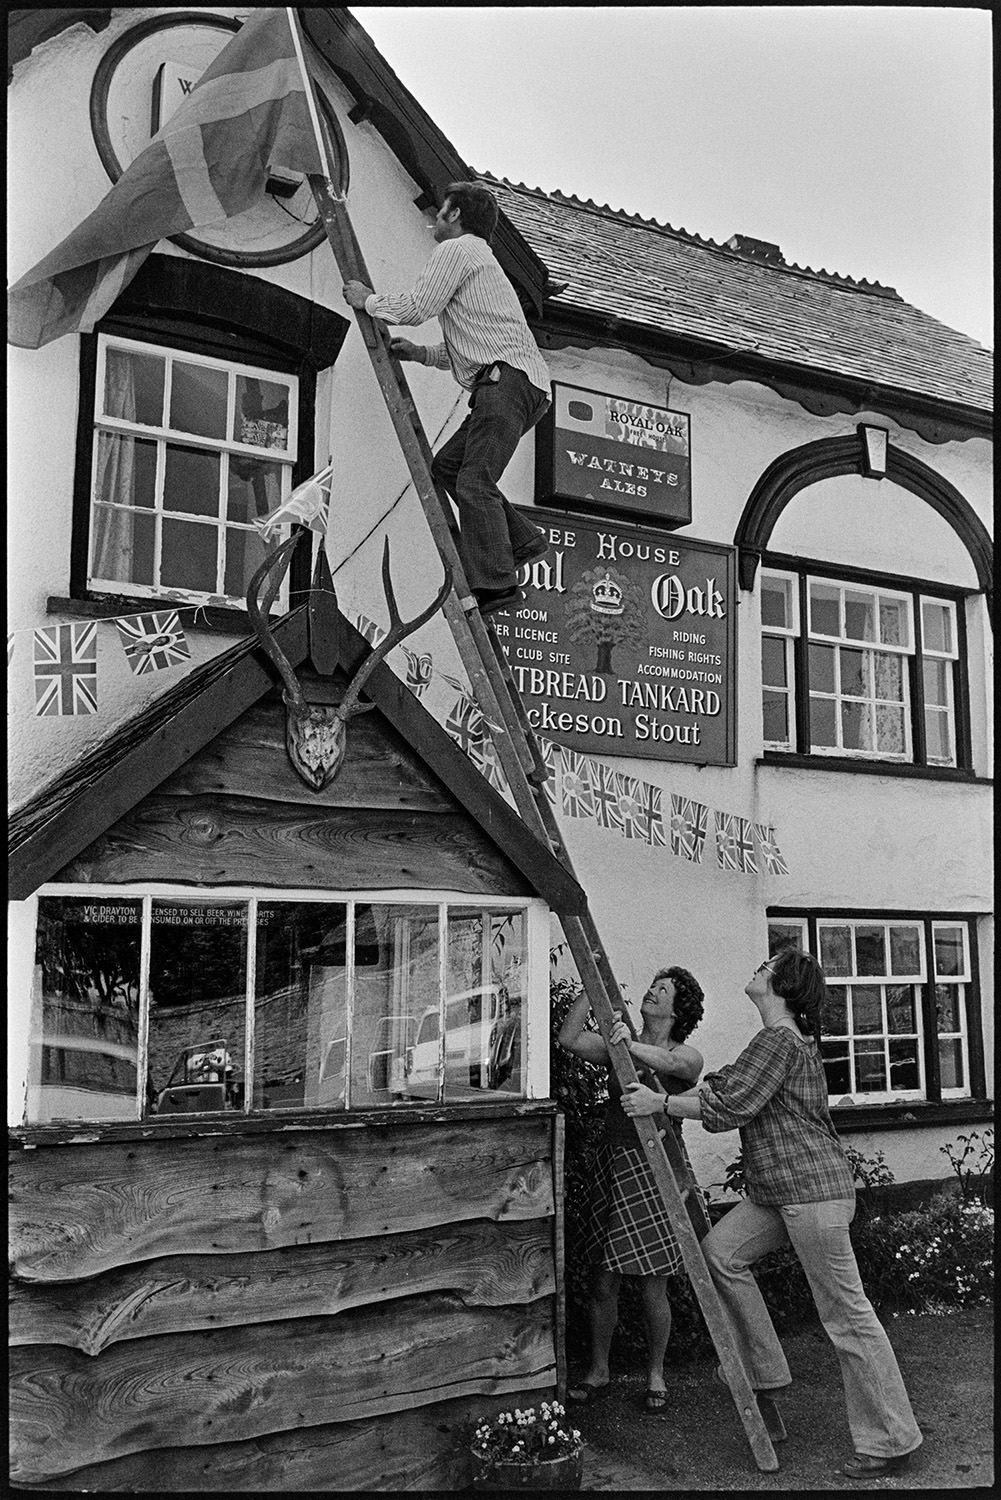 Putting up flags for jubilee on village pub. 
[A man up a ladder decorating the Royal Oak pub in Dolton with flags for Queen Elizabeth II Silver Jubilee. A man and a woman are holding the bottom of the ladder. The pub porch has a pair of antlers mounted on it.]